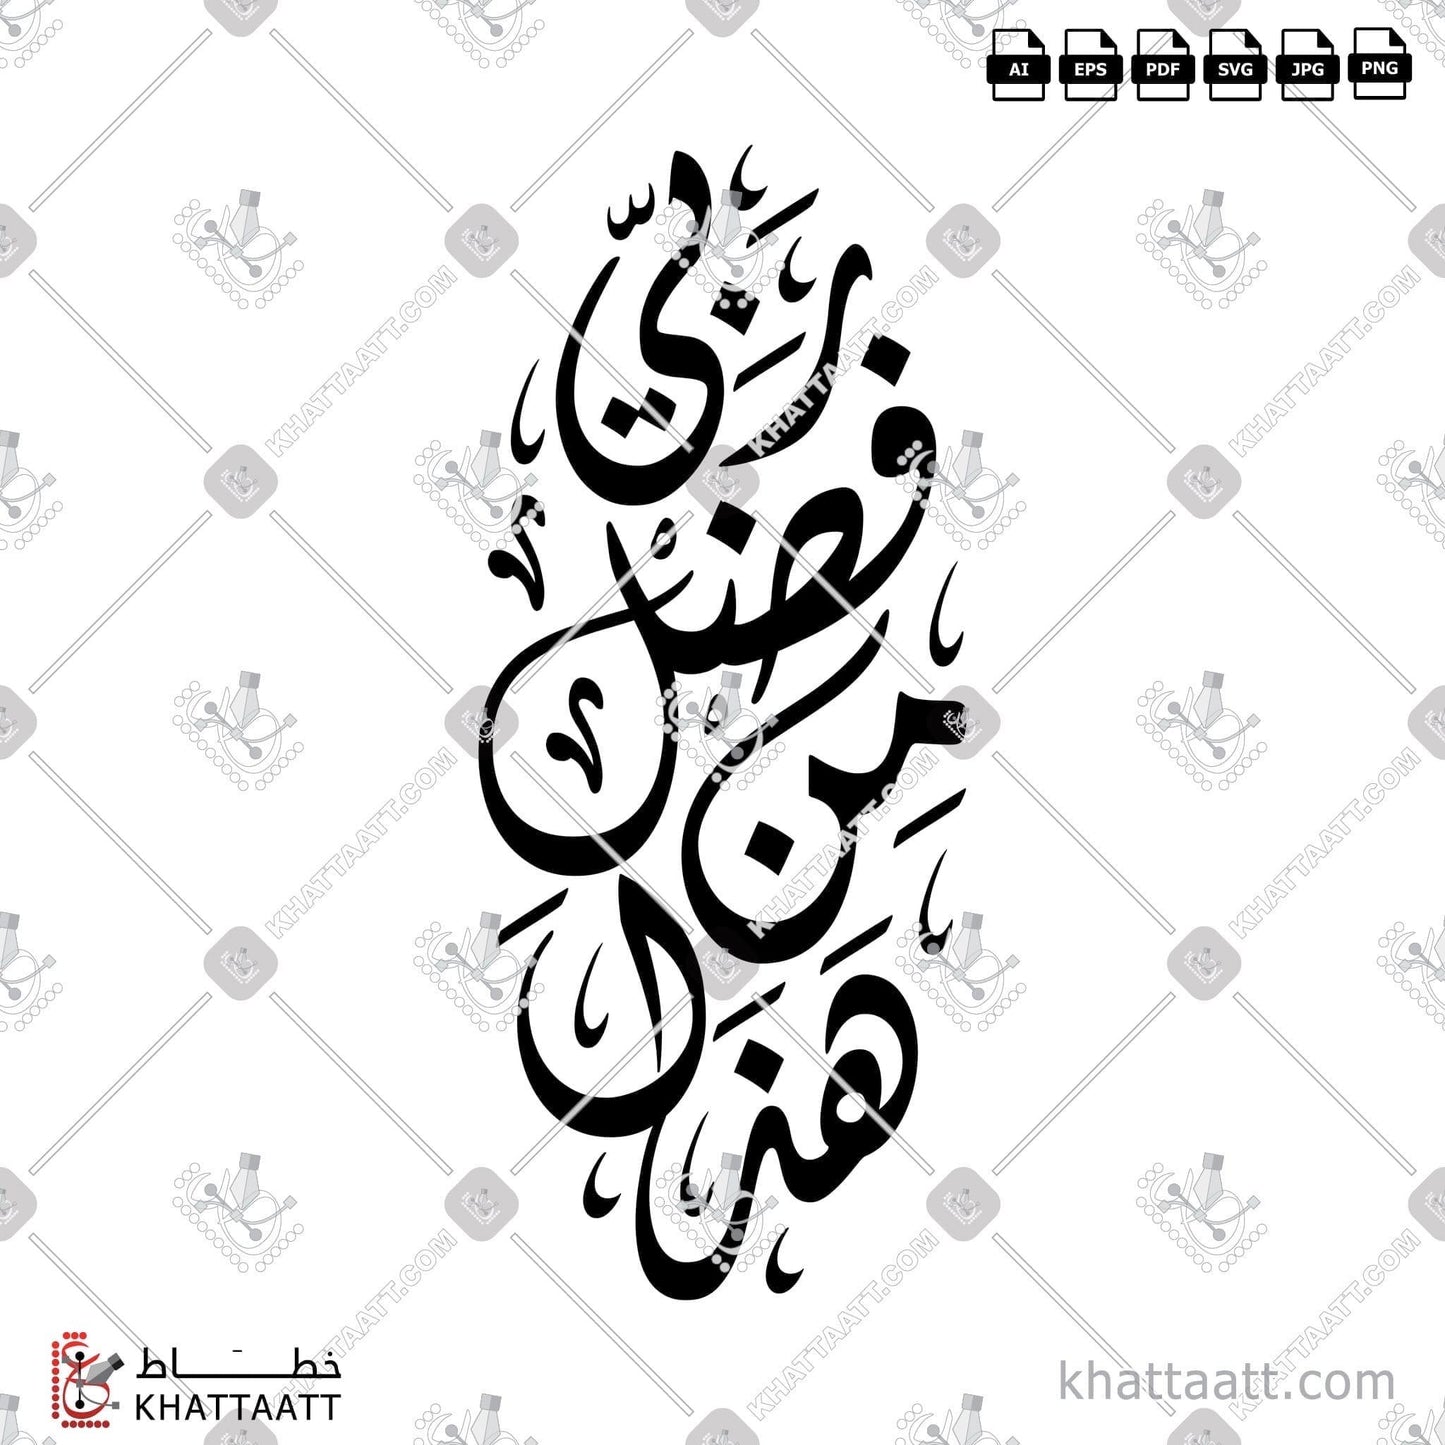 Download Arabic Calligraphy of هذا من فضل ربي in Diwani - الخط الديواني in vector and .png